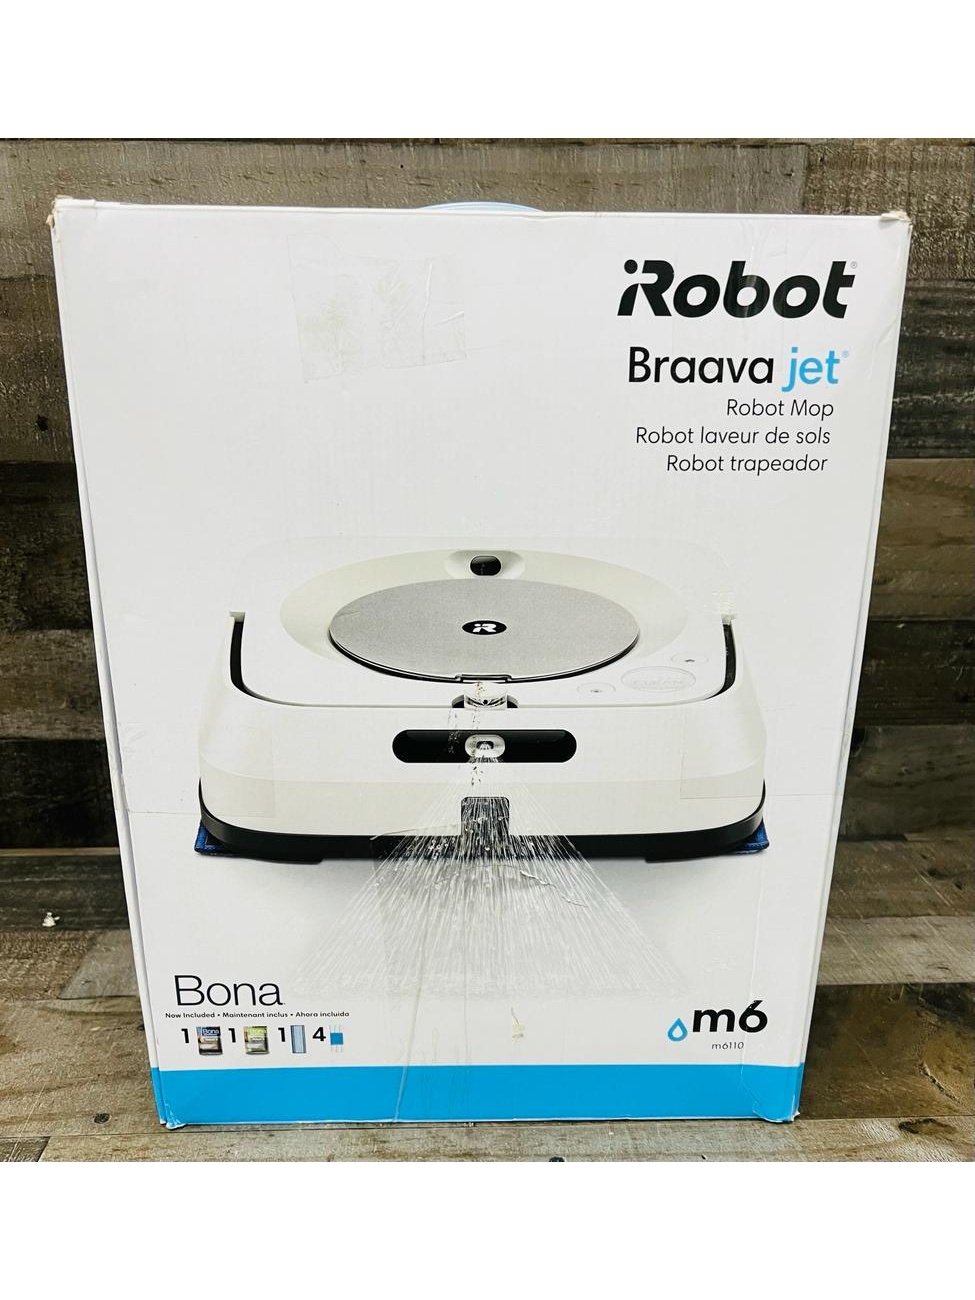 iRobot Braava Jet M6 (6110) Ultimate Robot Mop- Wi-Fi Connected, Precision Jet Spray, Smart Mapping, Works with Alexa, Ideal for Multiple Rooms, Recharges and Resumes, White, Braava M6